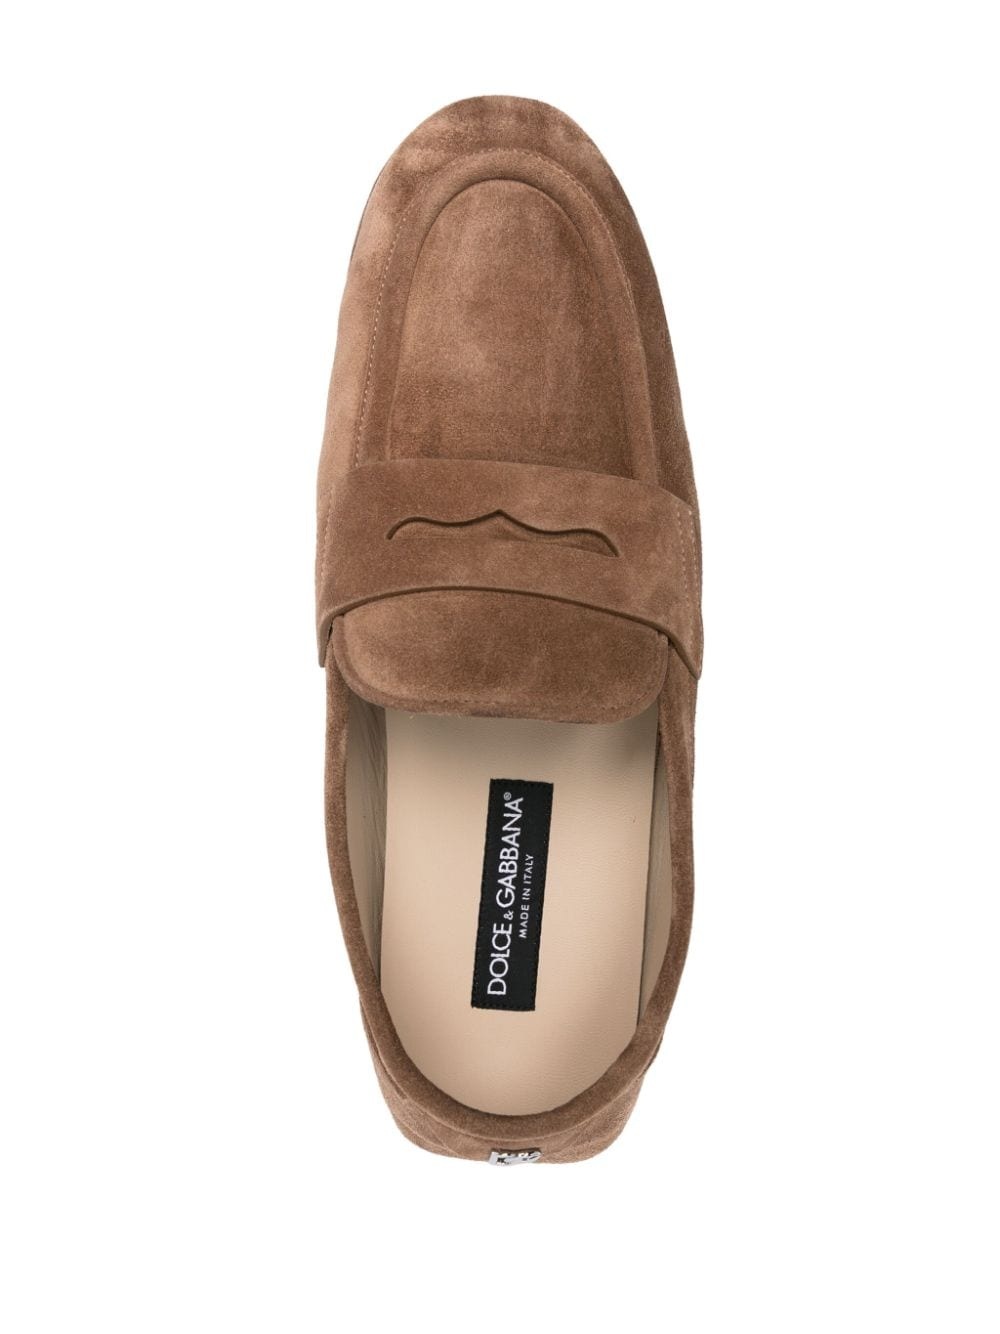 logo-plaque suede loafers - 4